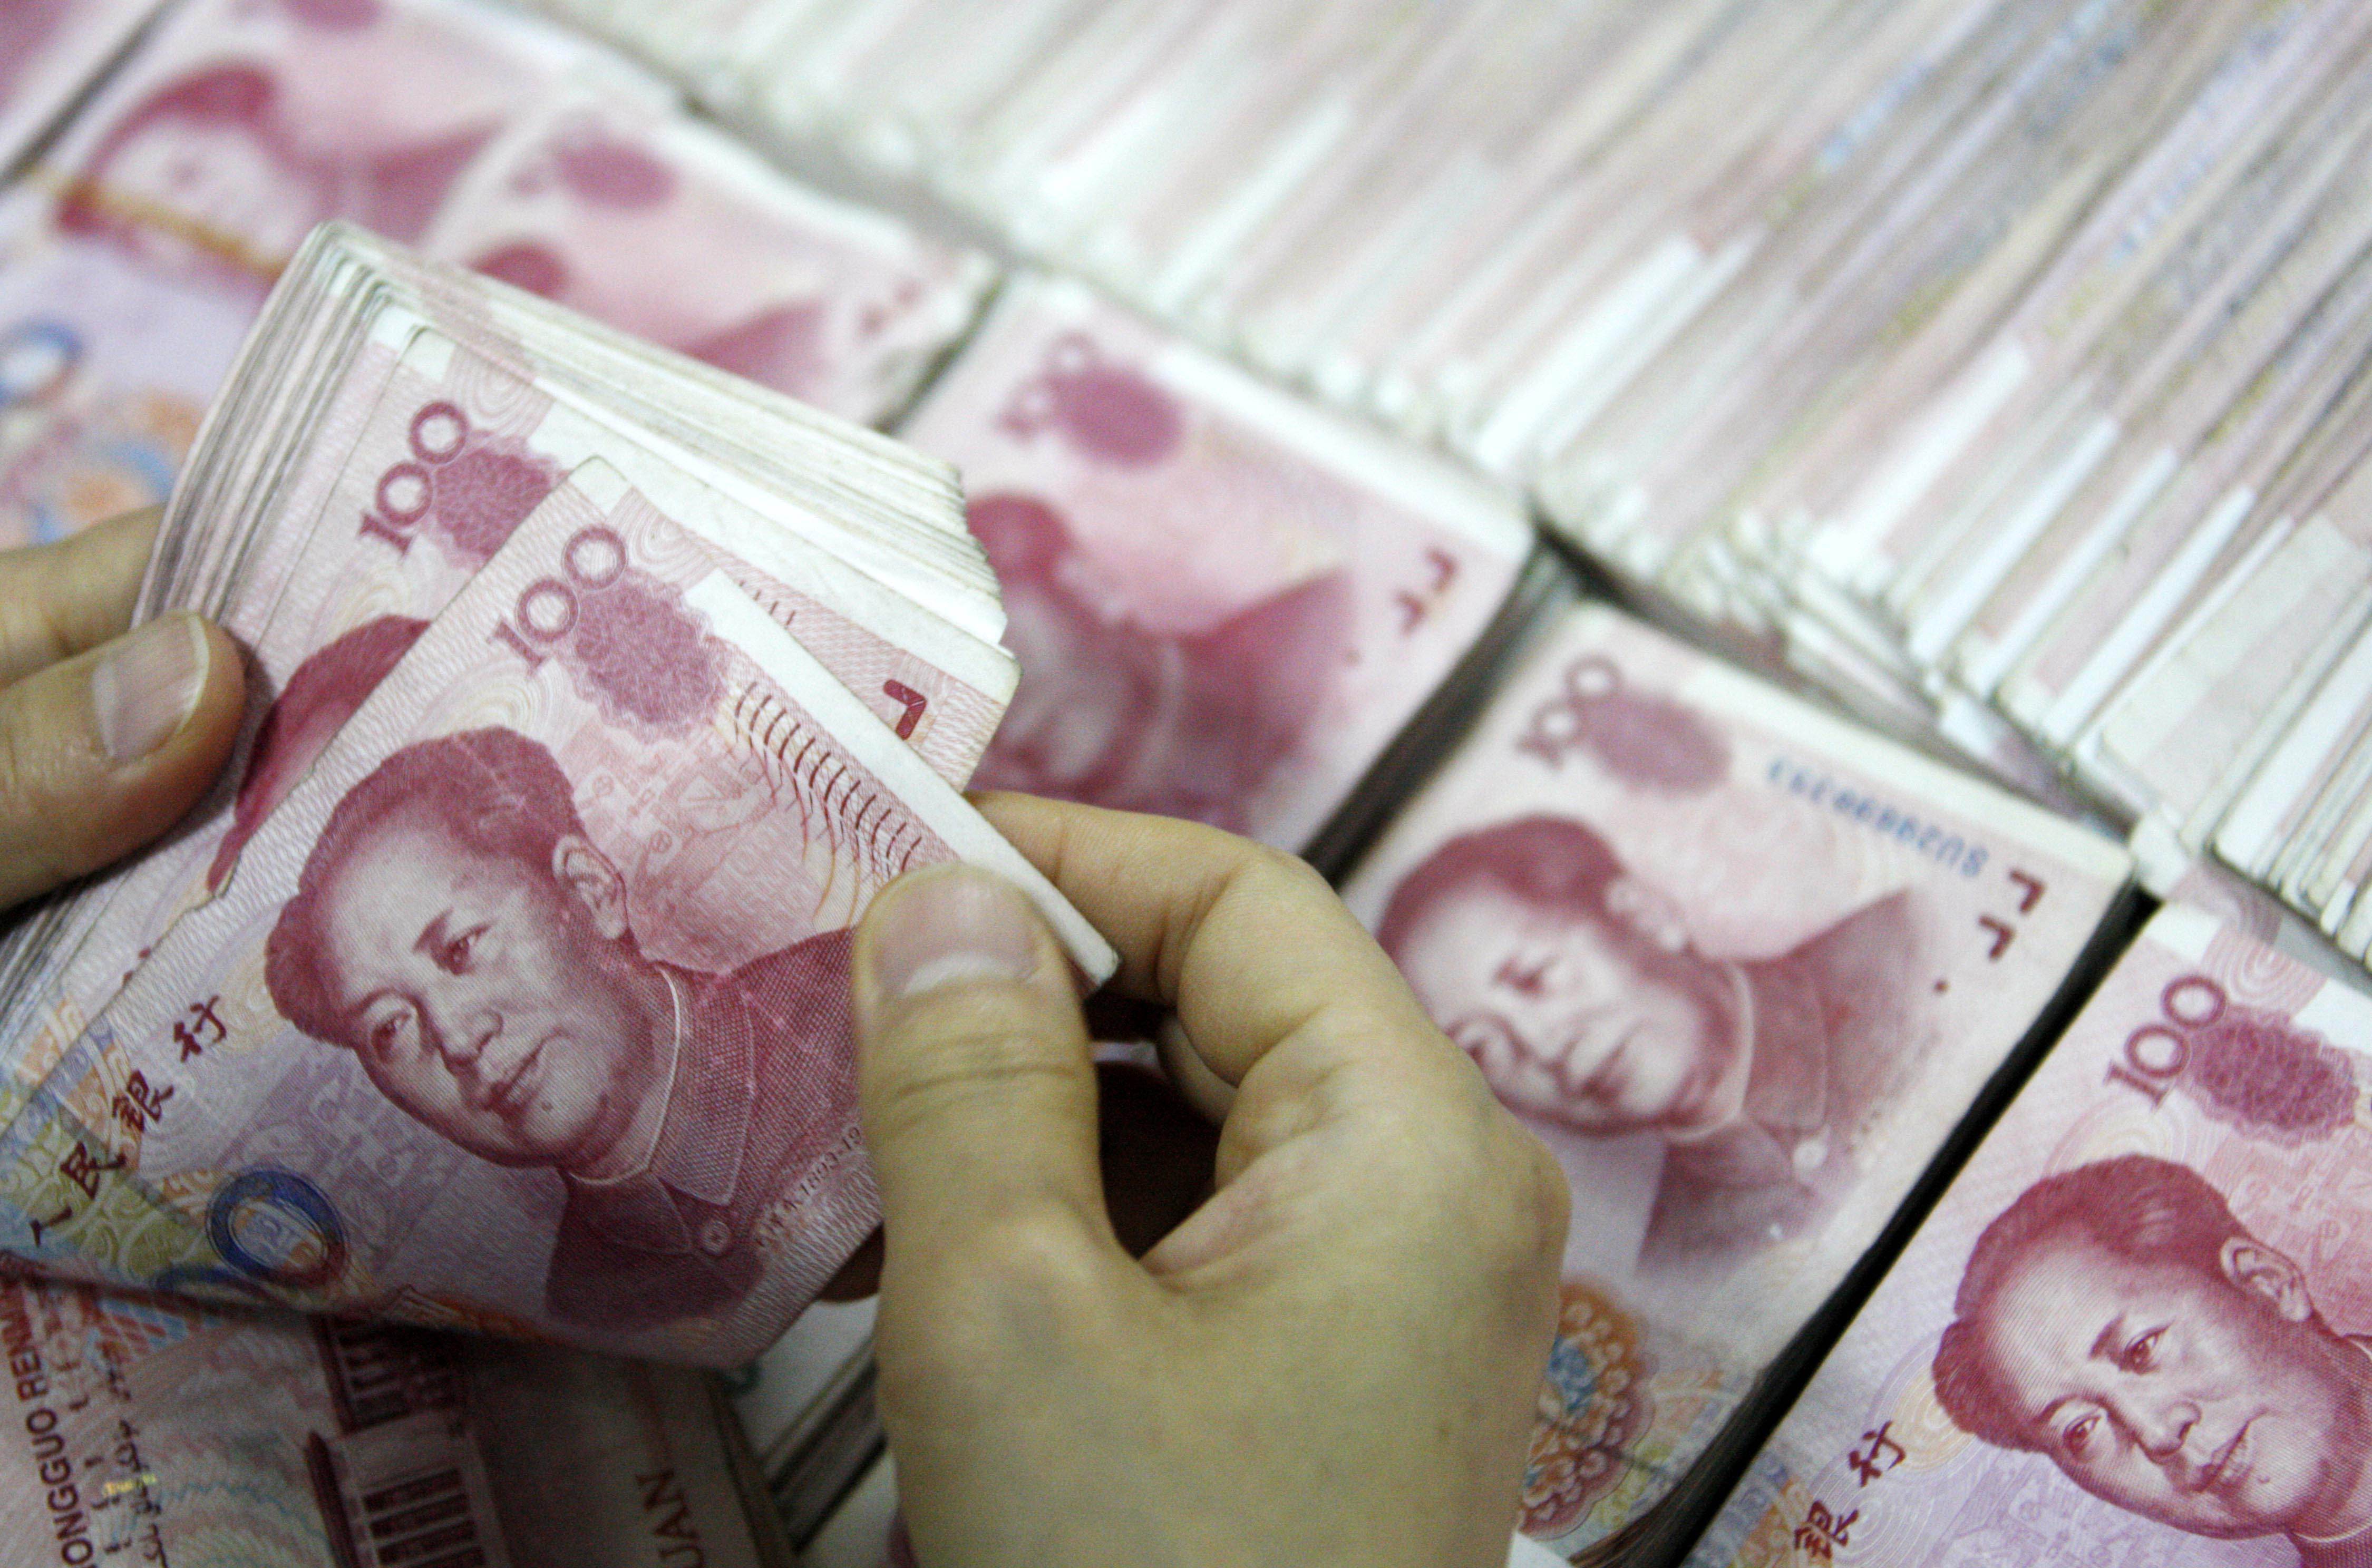 A 54-year-old woman lost 190,000 yuan (HK$240,451) after transferring it to a designated account. Photo: AFP